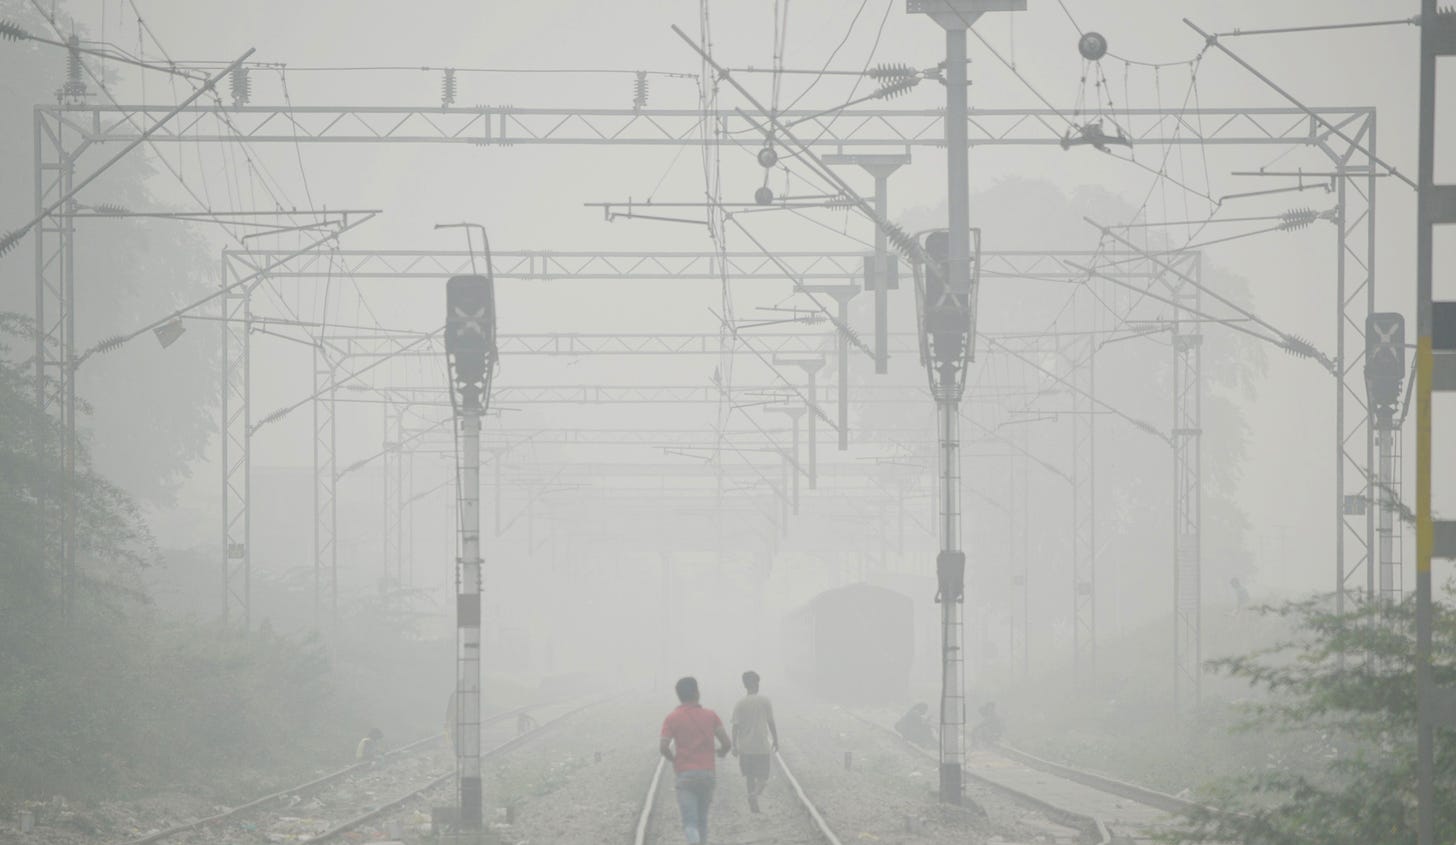 India Air Quality Index: Air Pollution Causes | Fortune